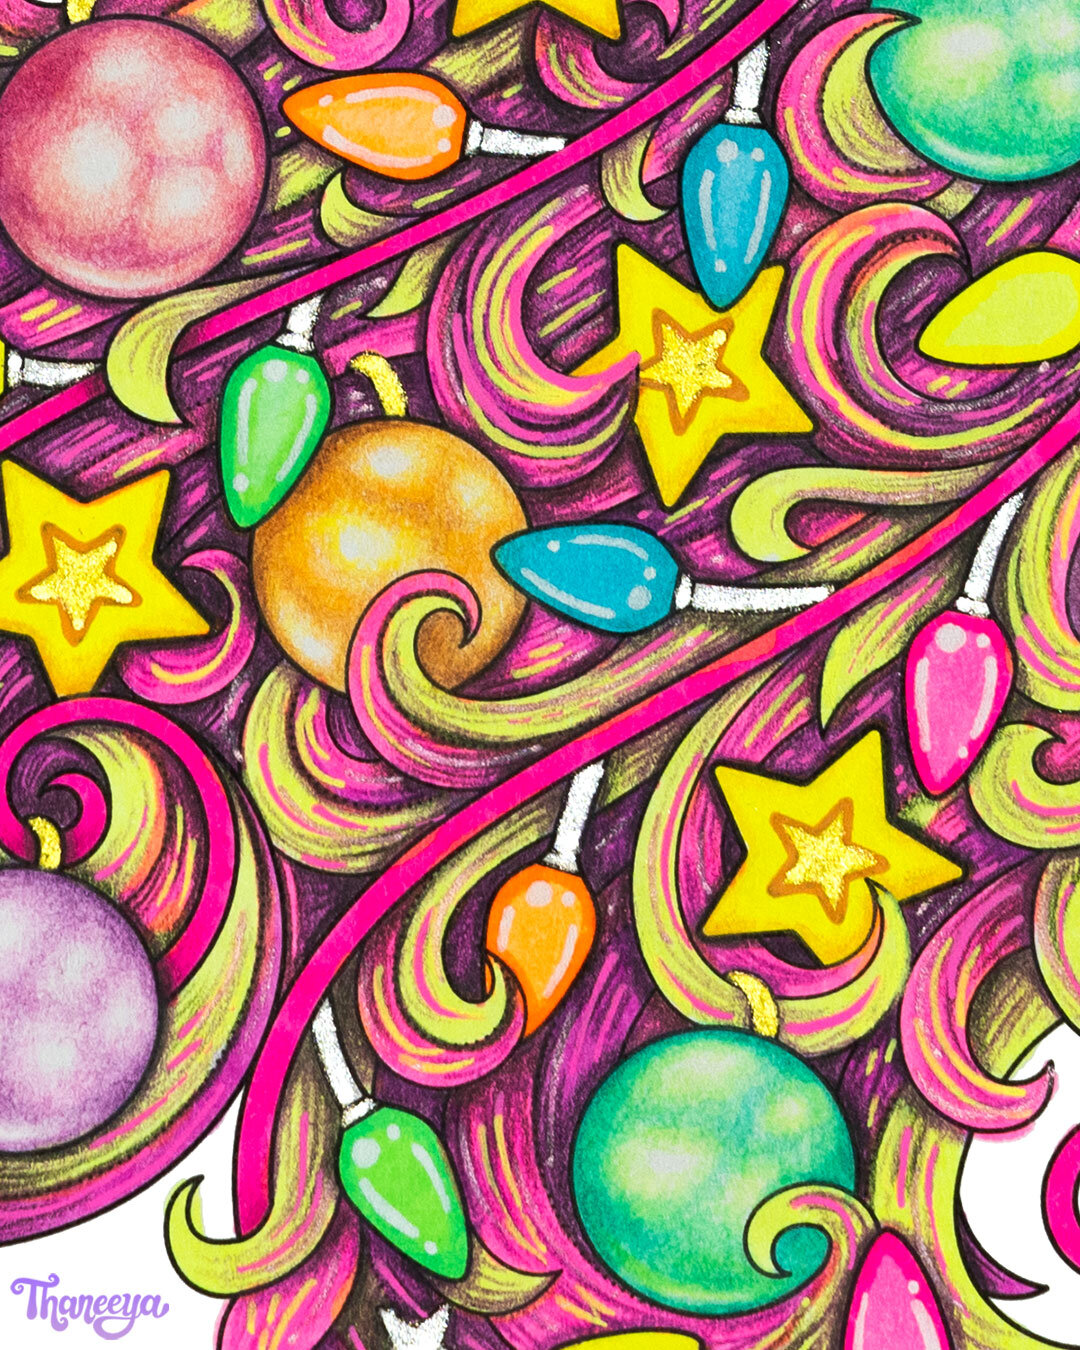 Christmas-Unicorn-Coloring-Page-by-Thaneeya-McArdle-Close-up-4.jpg